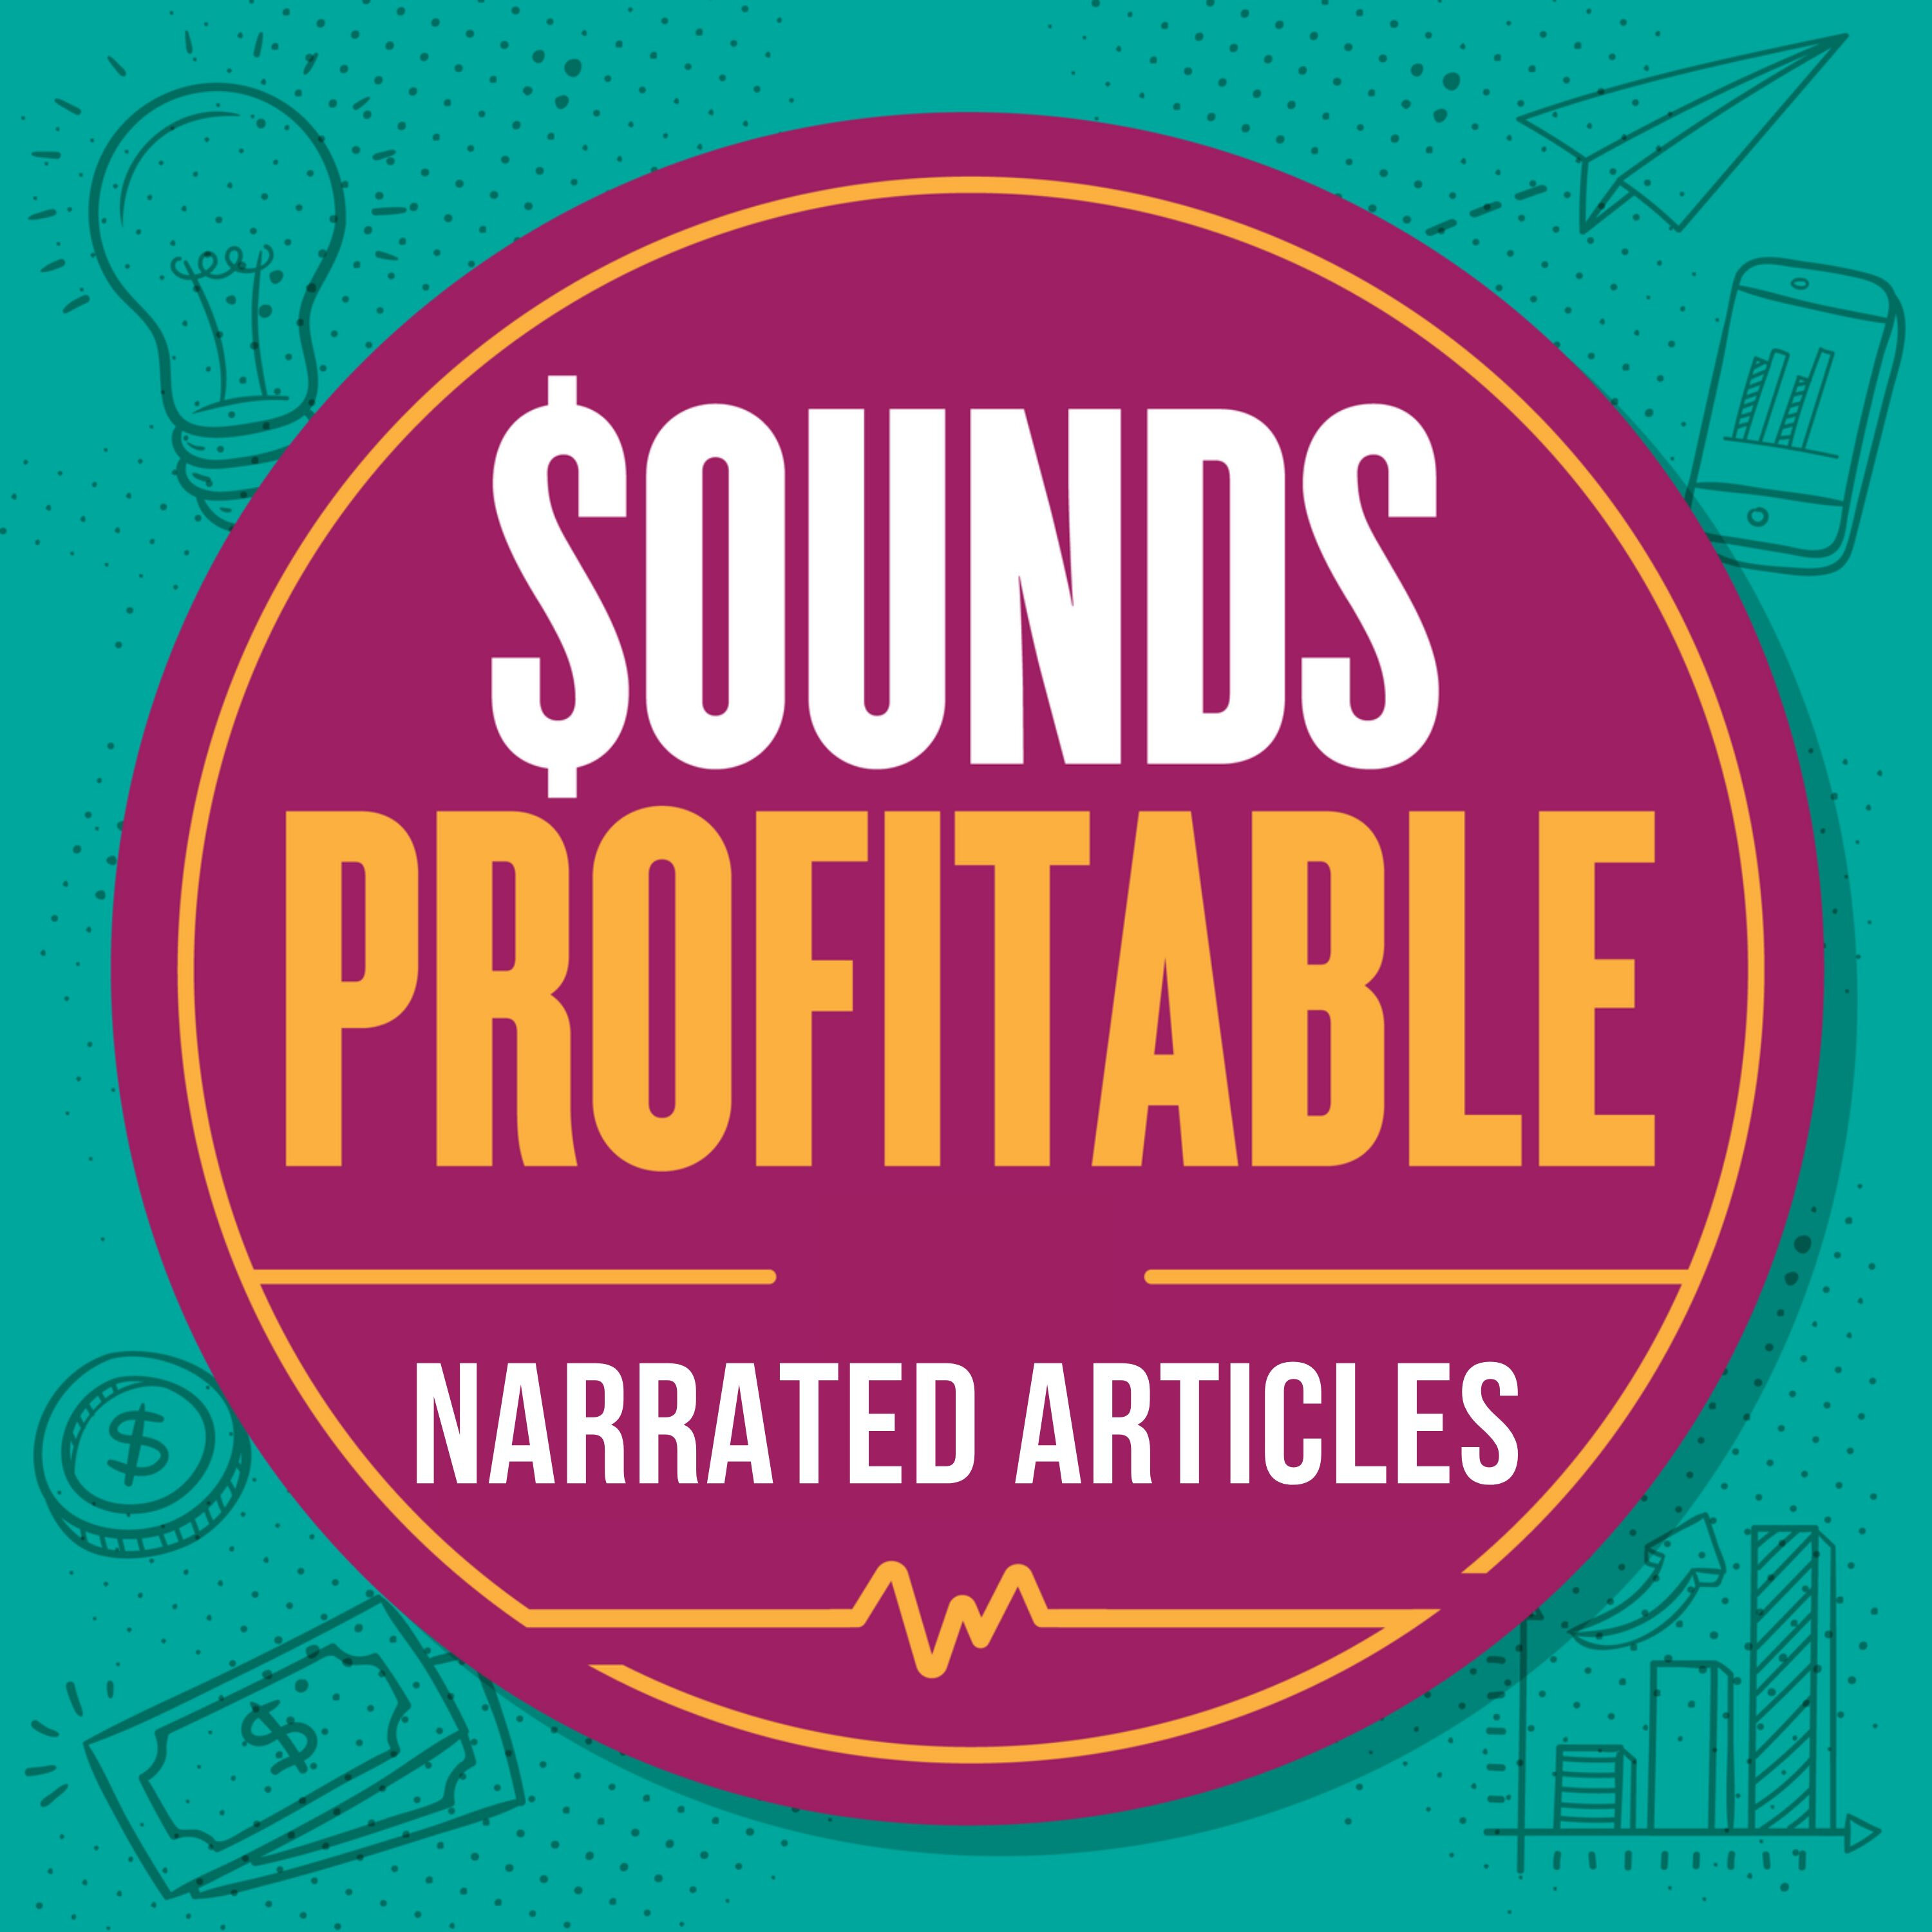 Sounds Profitable: Narrated Articles